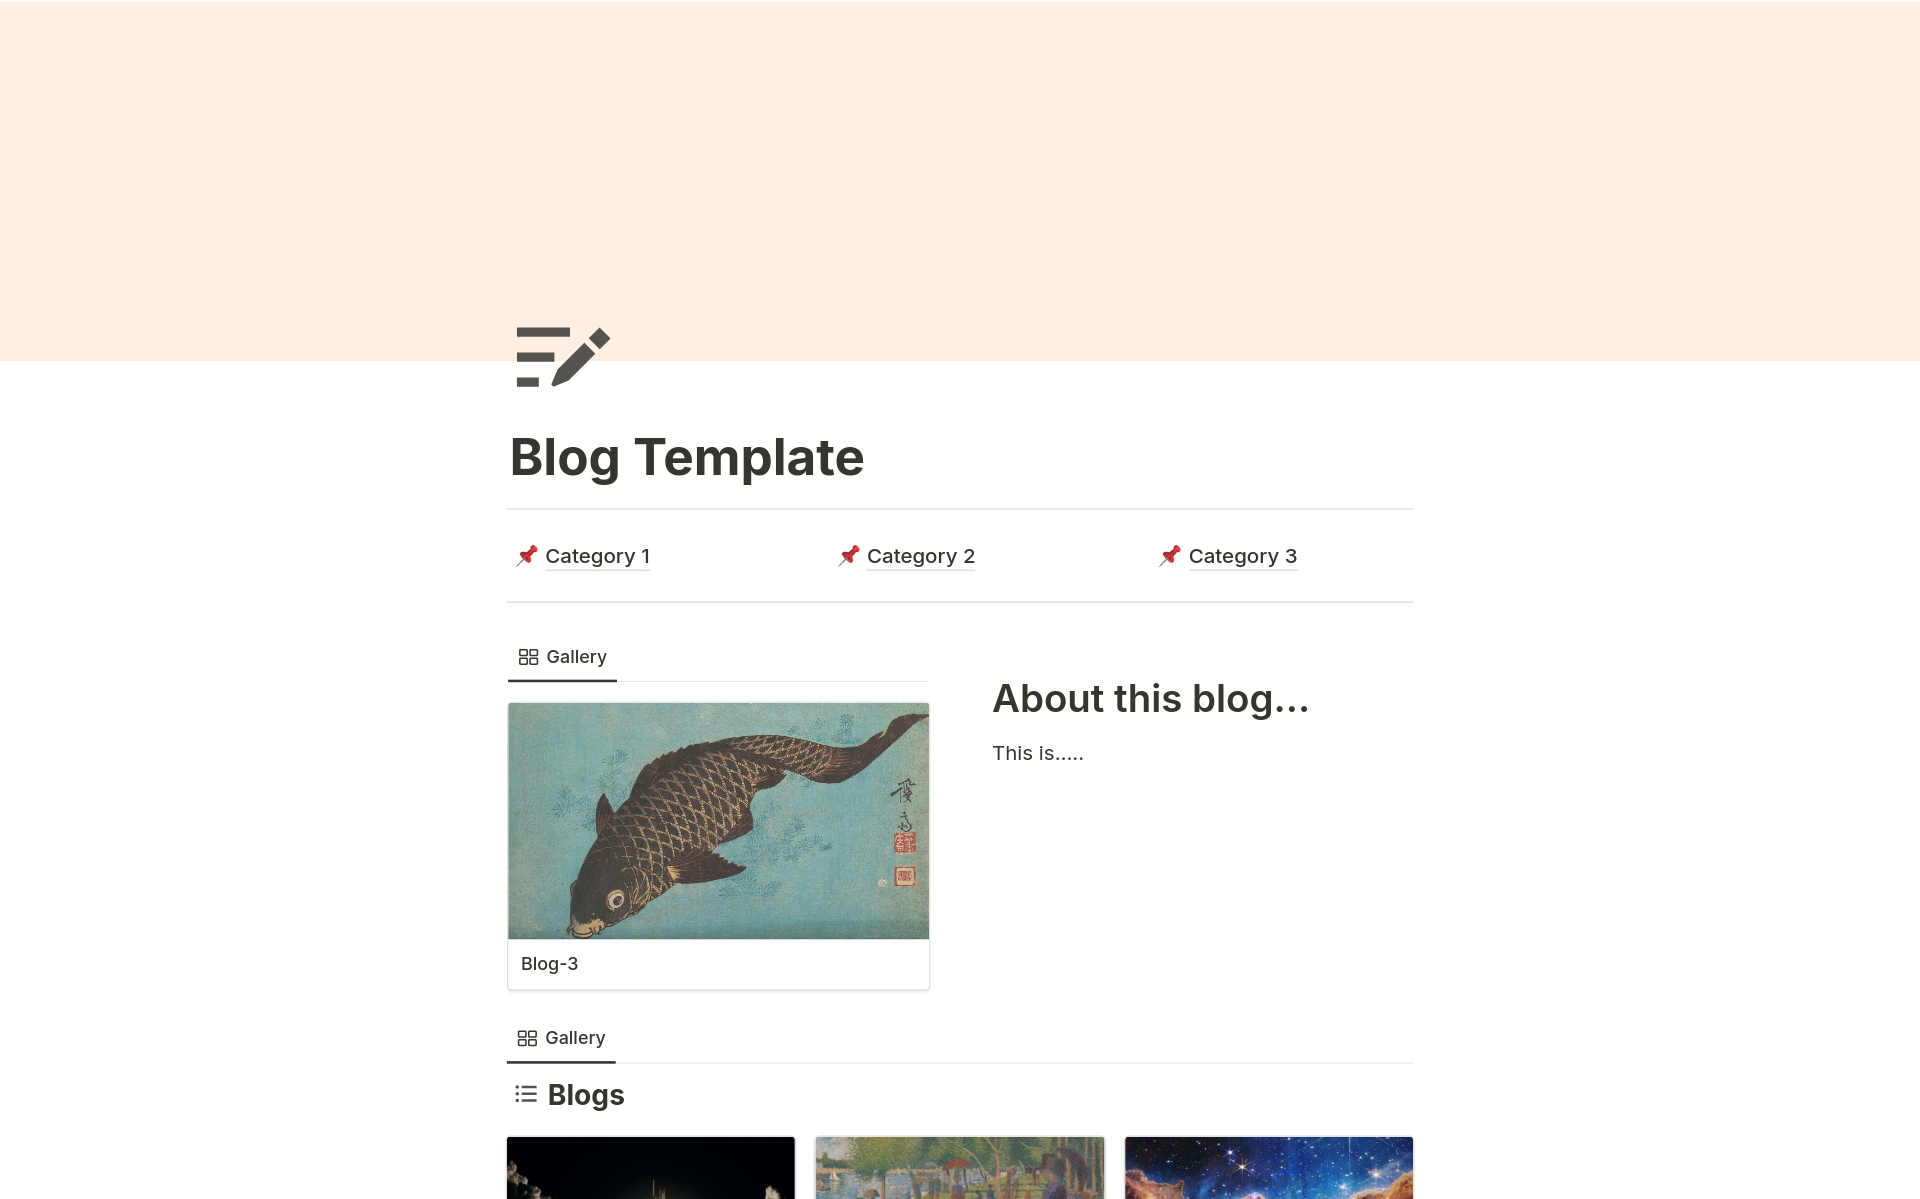 You can use this as blog-template as well as writing management for different blogs and media outlet